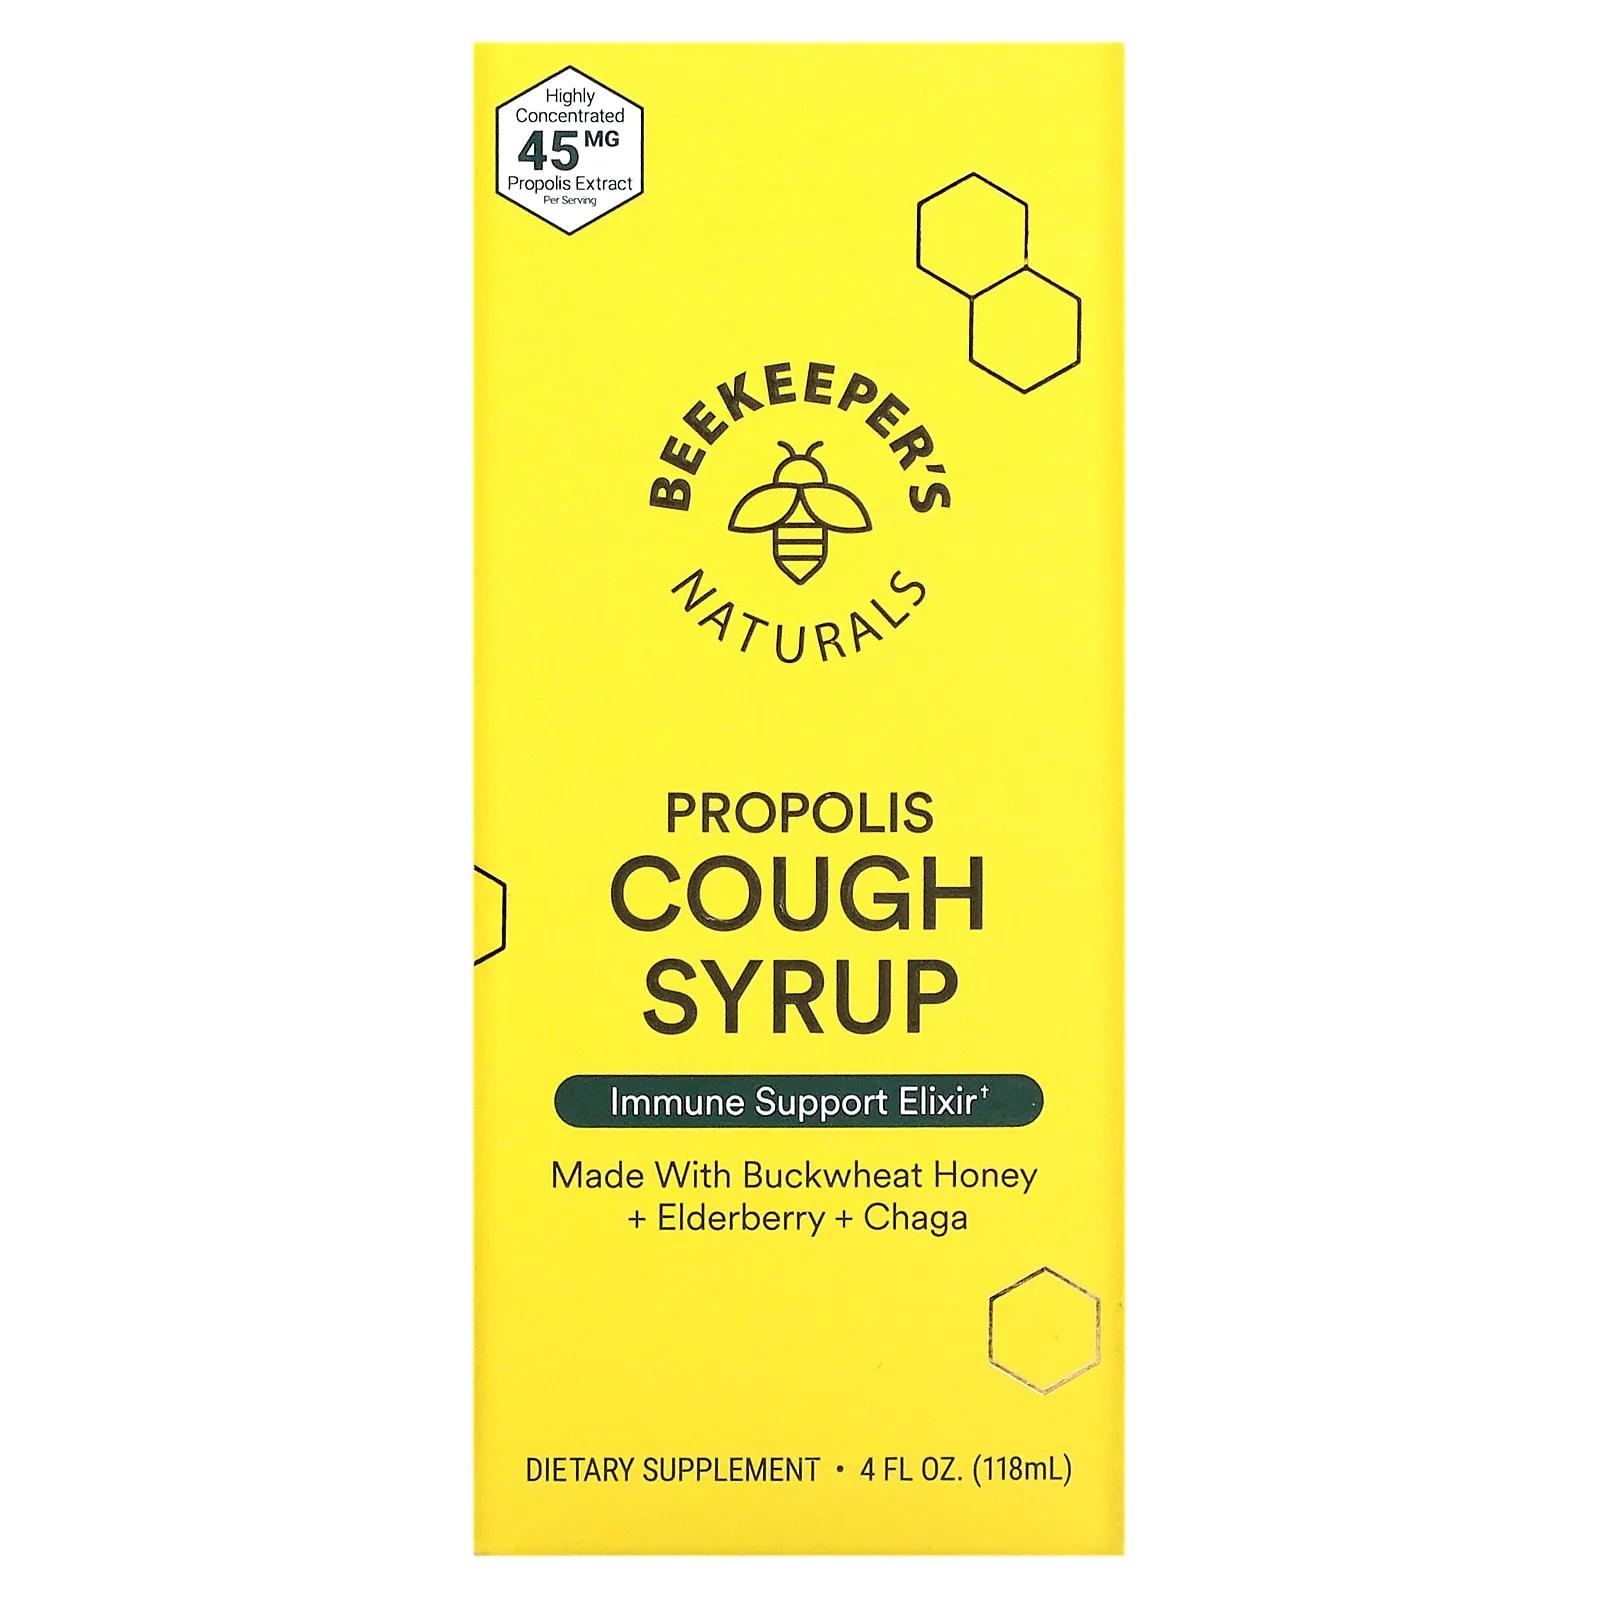 Beekeeper's Naturals B. Soothed Cough Syrup 4 fl oz (118 ml) beekeeper s naturals b soothed cough syrup 4 fl oz 118 ml